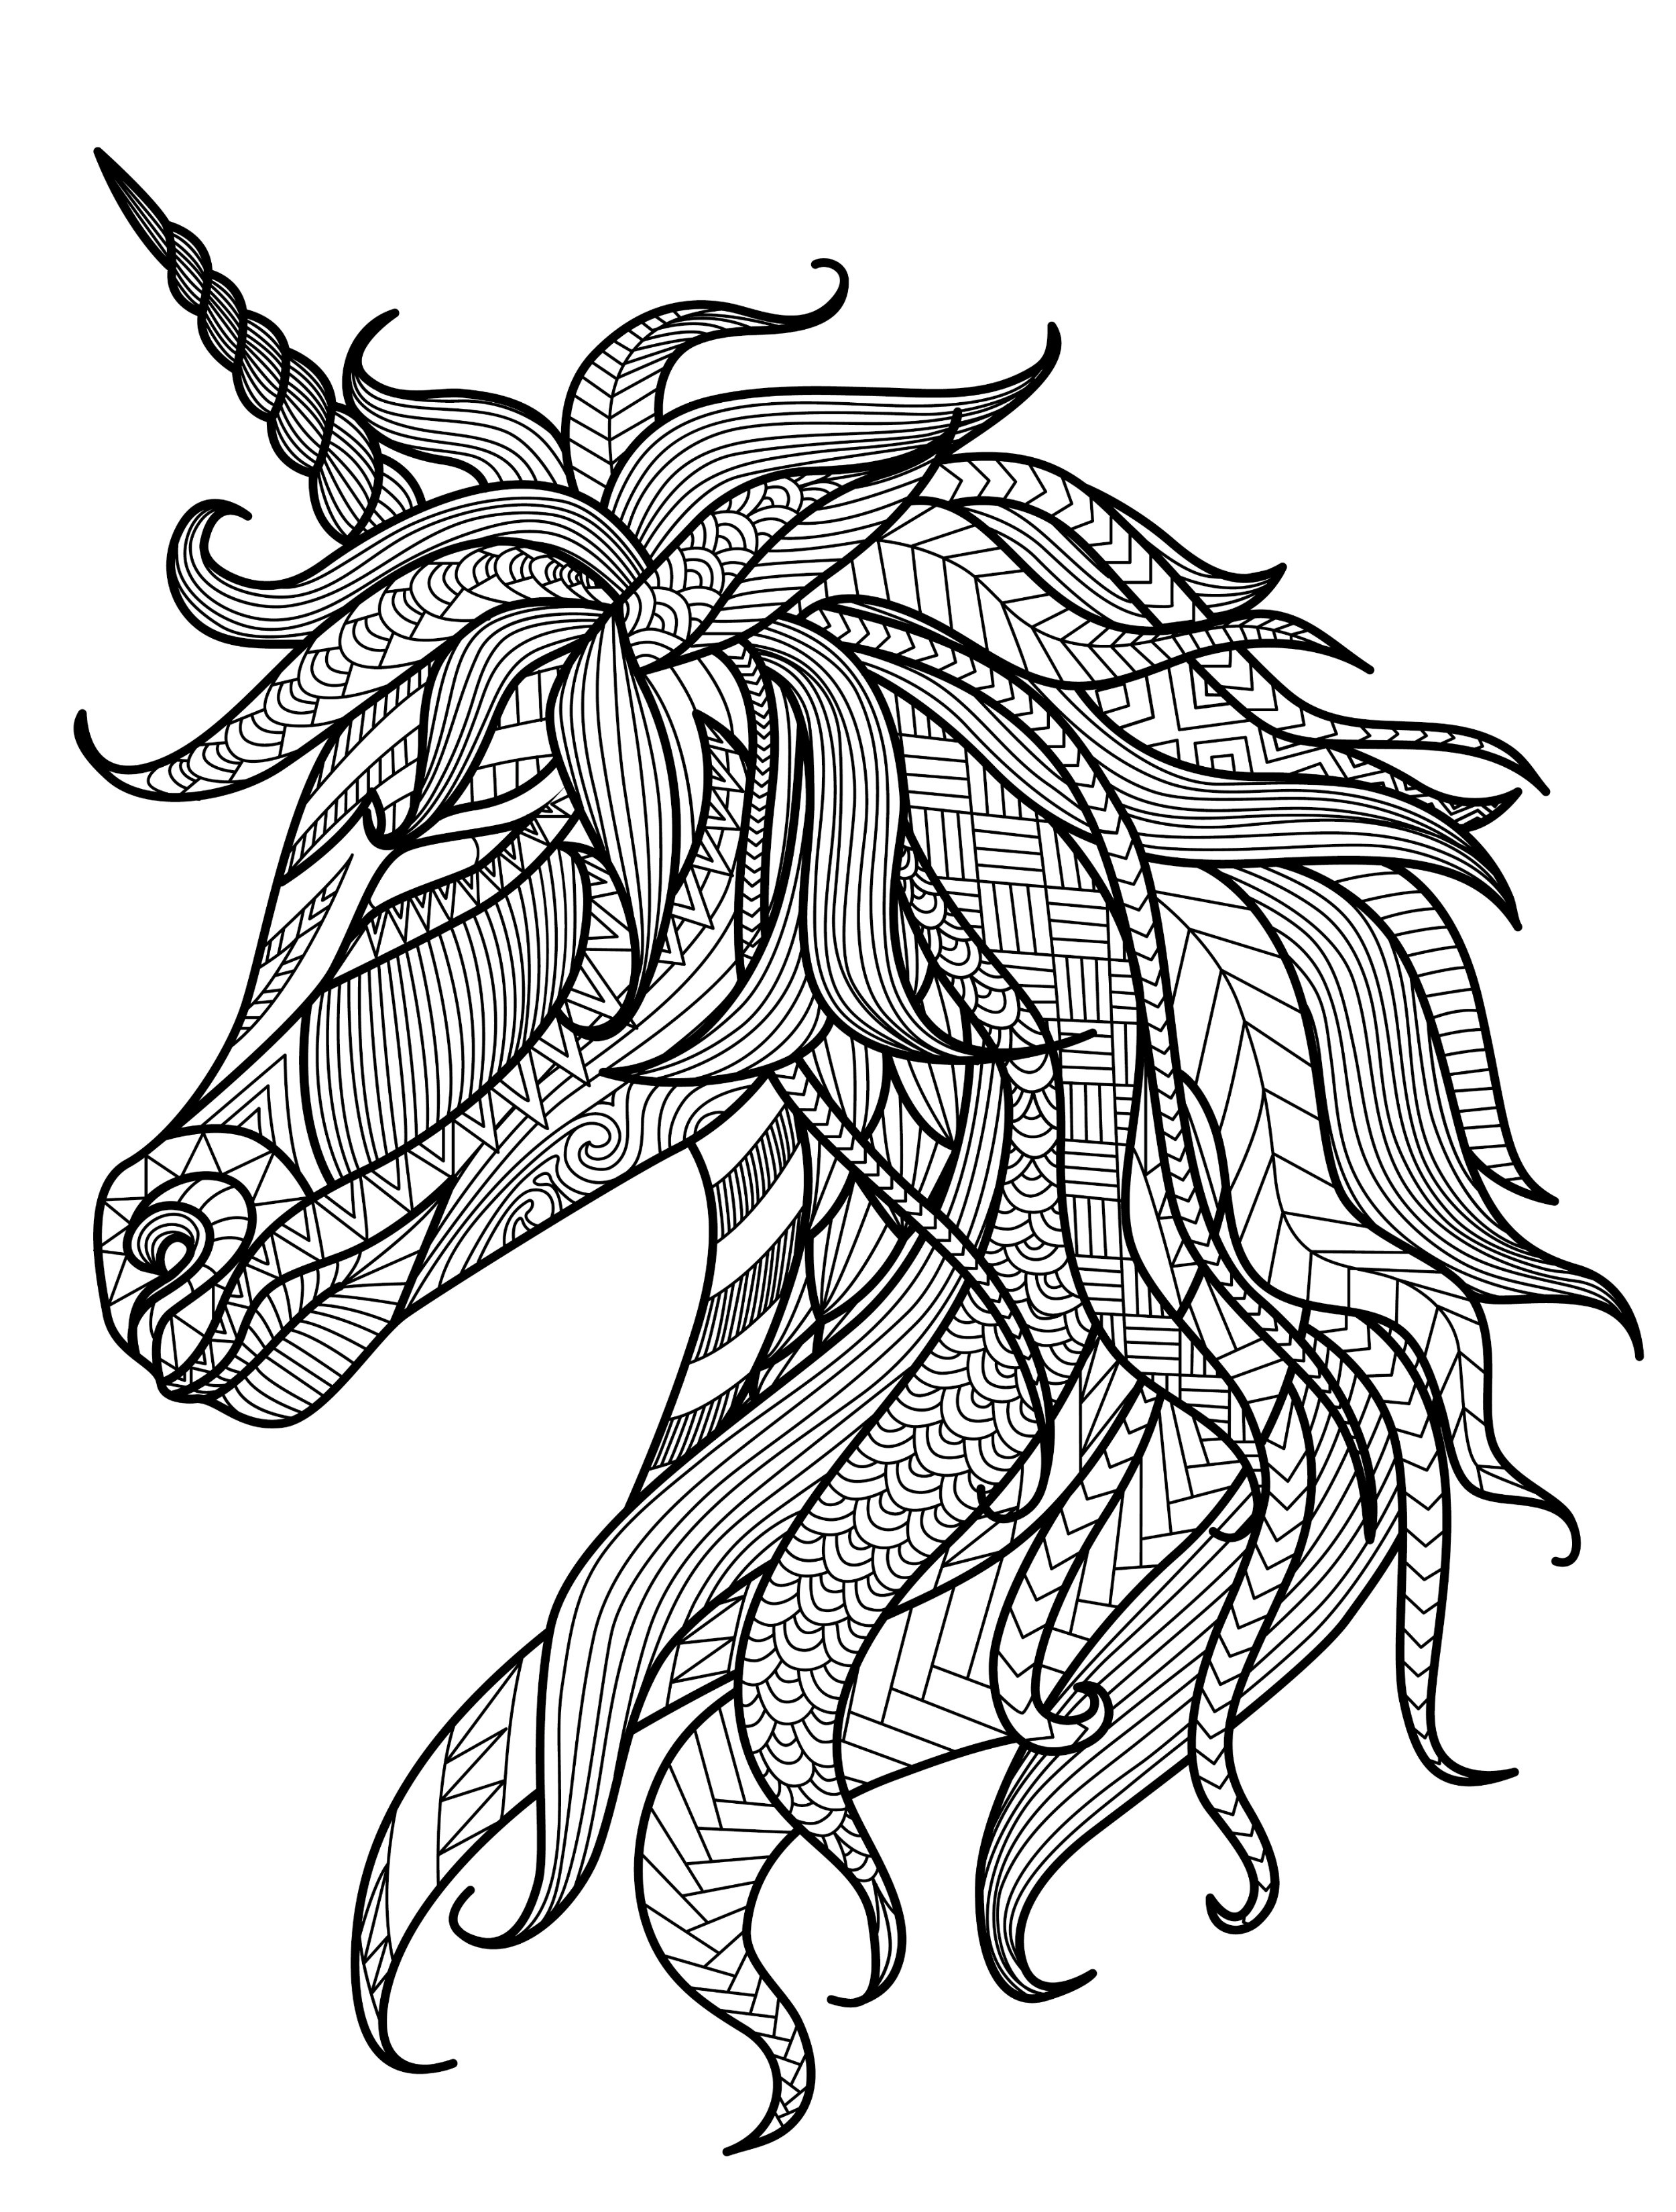 Adult Coloring Pages Unicorn
 20 Gorgeous Free Printable Adult Coloring Pages Page 5